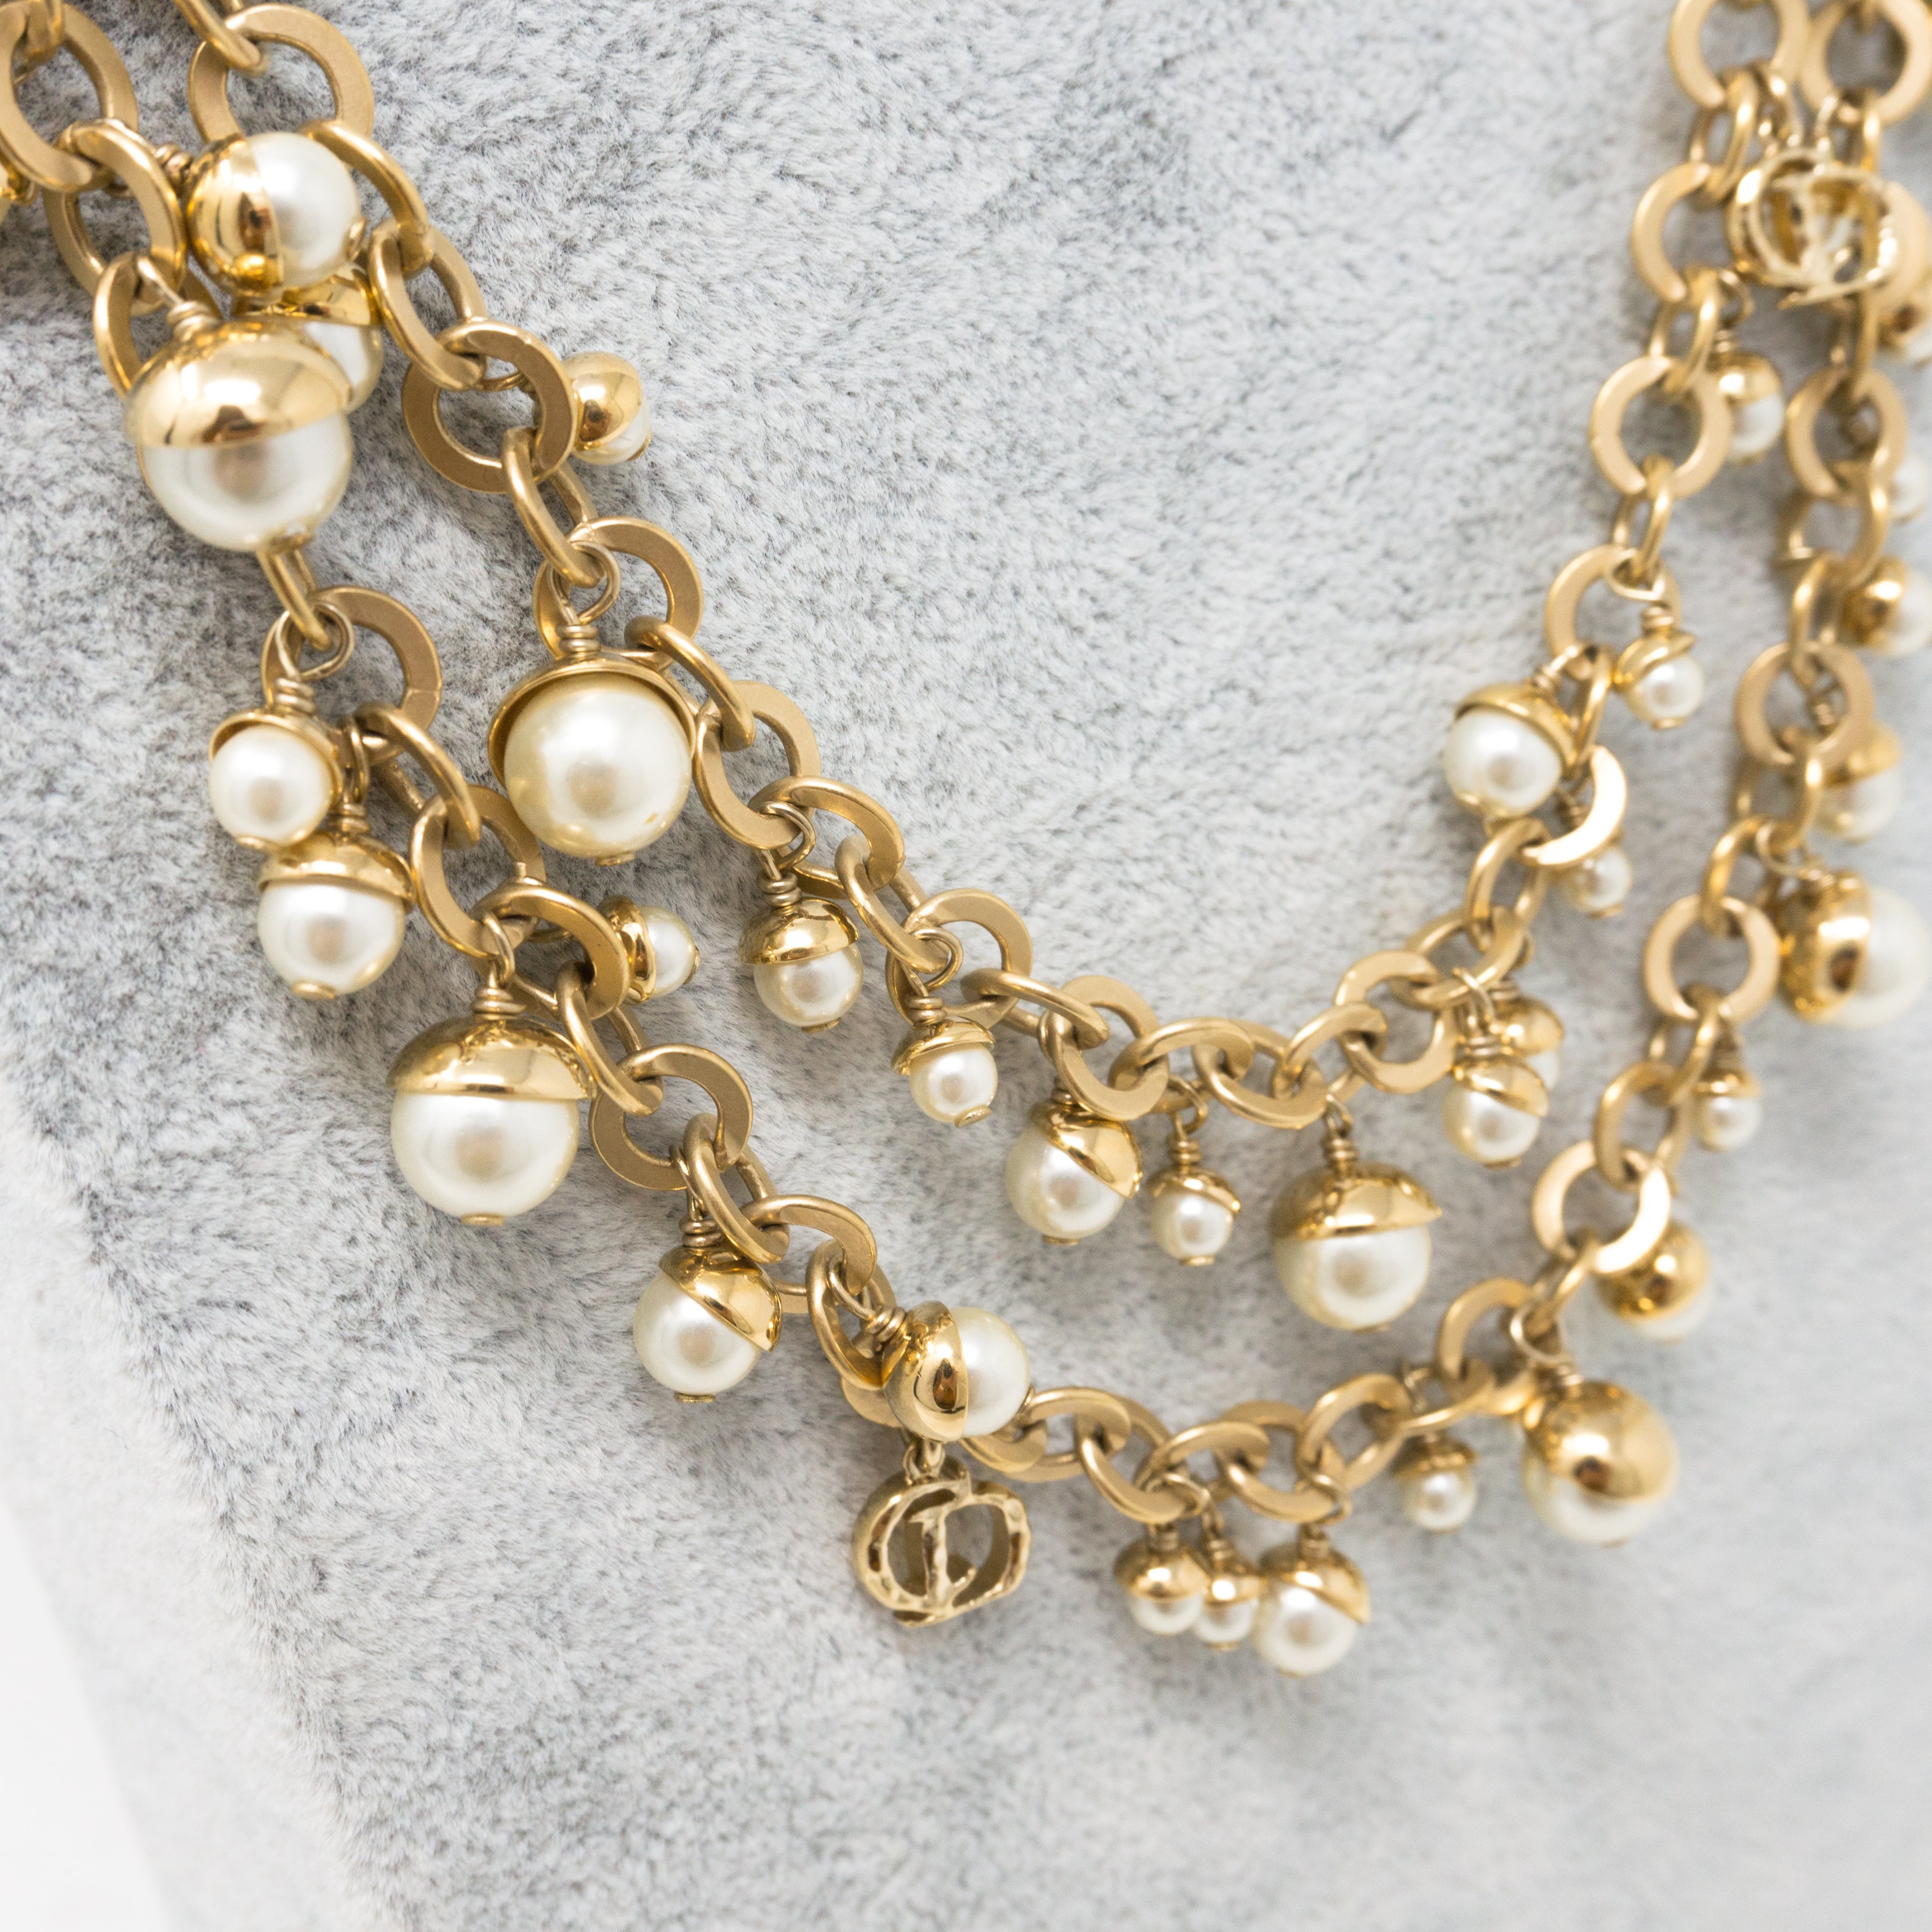 Christian Dior pearl necklace with gold DIOR and stars  LuxuryPromise